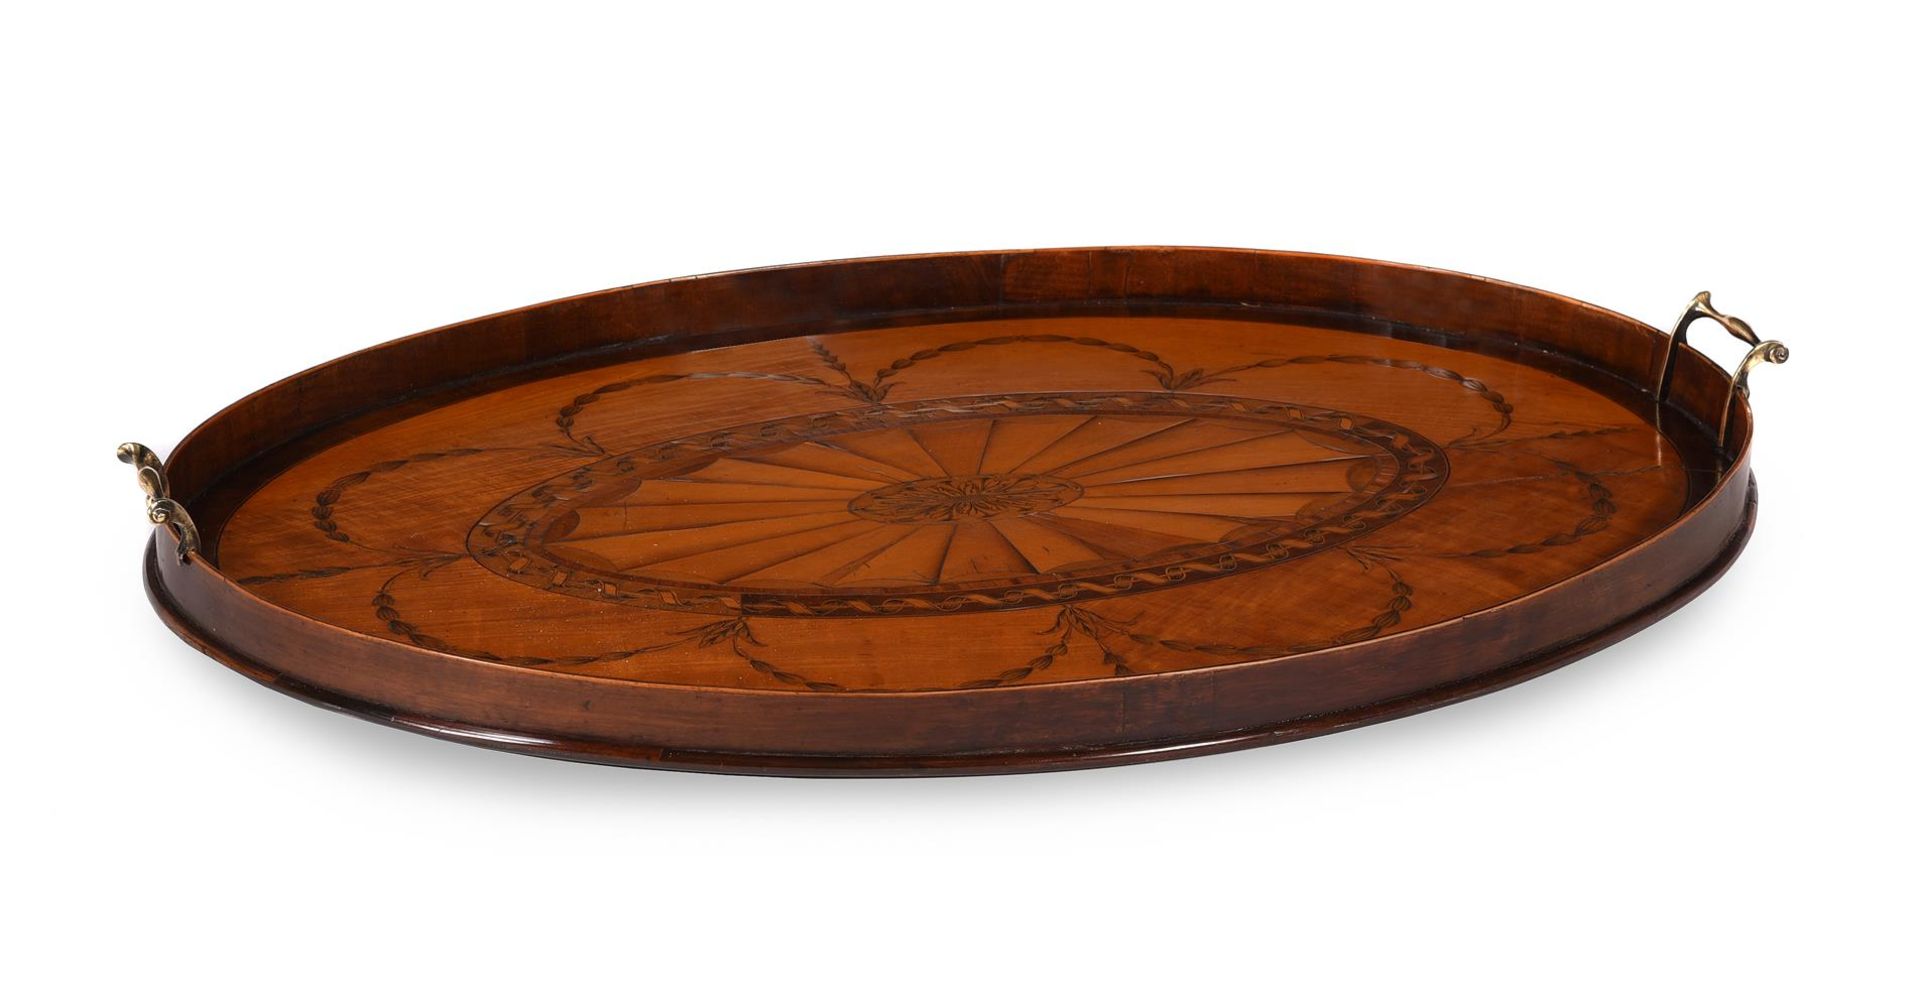 A GEORGE III SATINWOOD AND MARQUETRY INLAID OVAL TRAY, ATTRIBUTED TO GILLOWS, CIRCA 1780 - Bild 3 aus 4